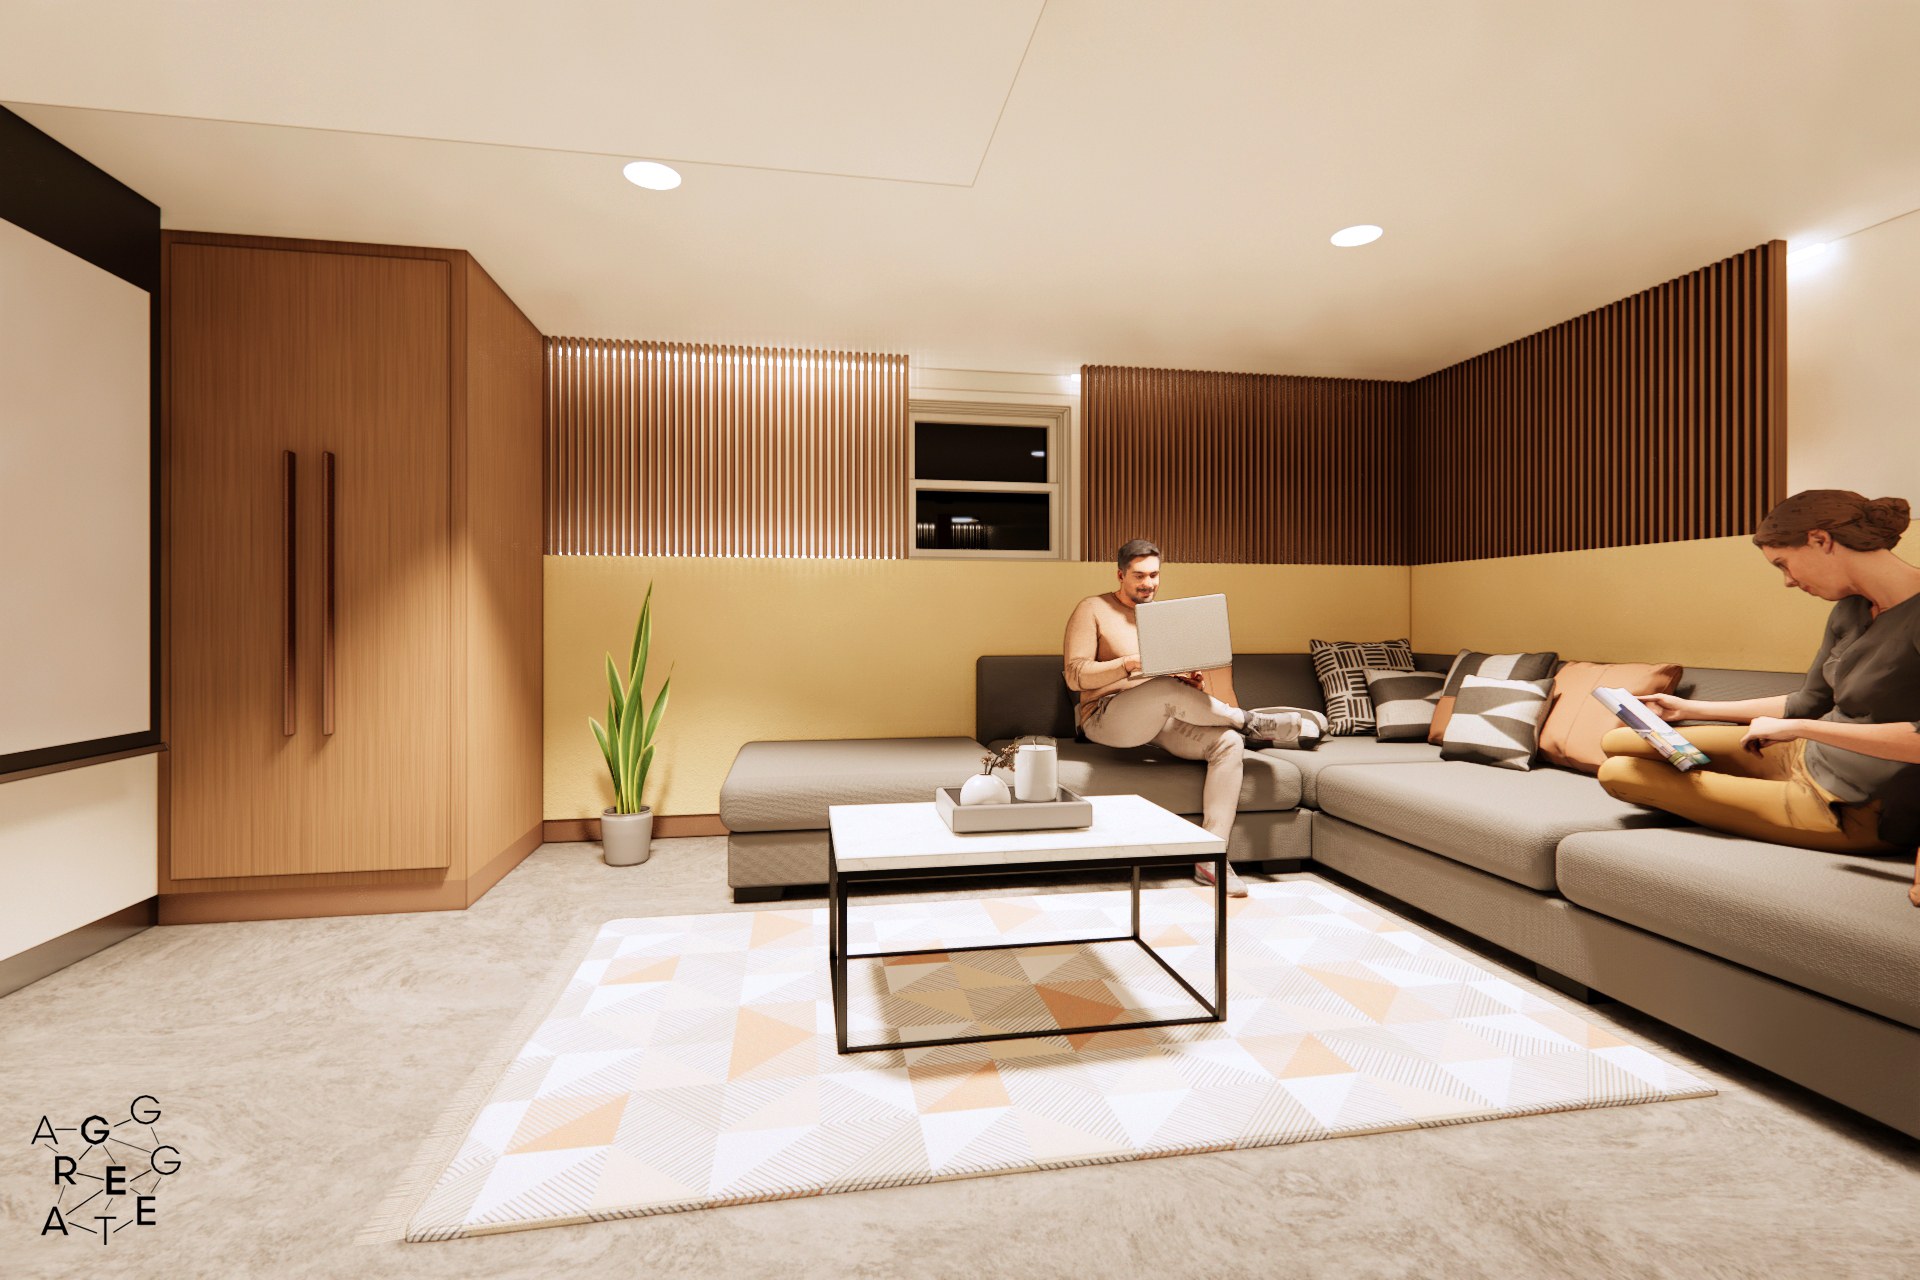 Basement living room perspective rendering with two people lounging on a L-shaped couch.